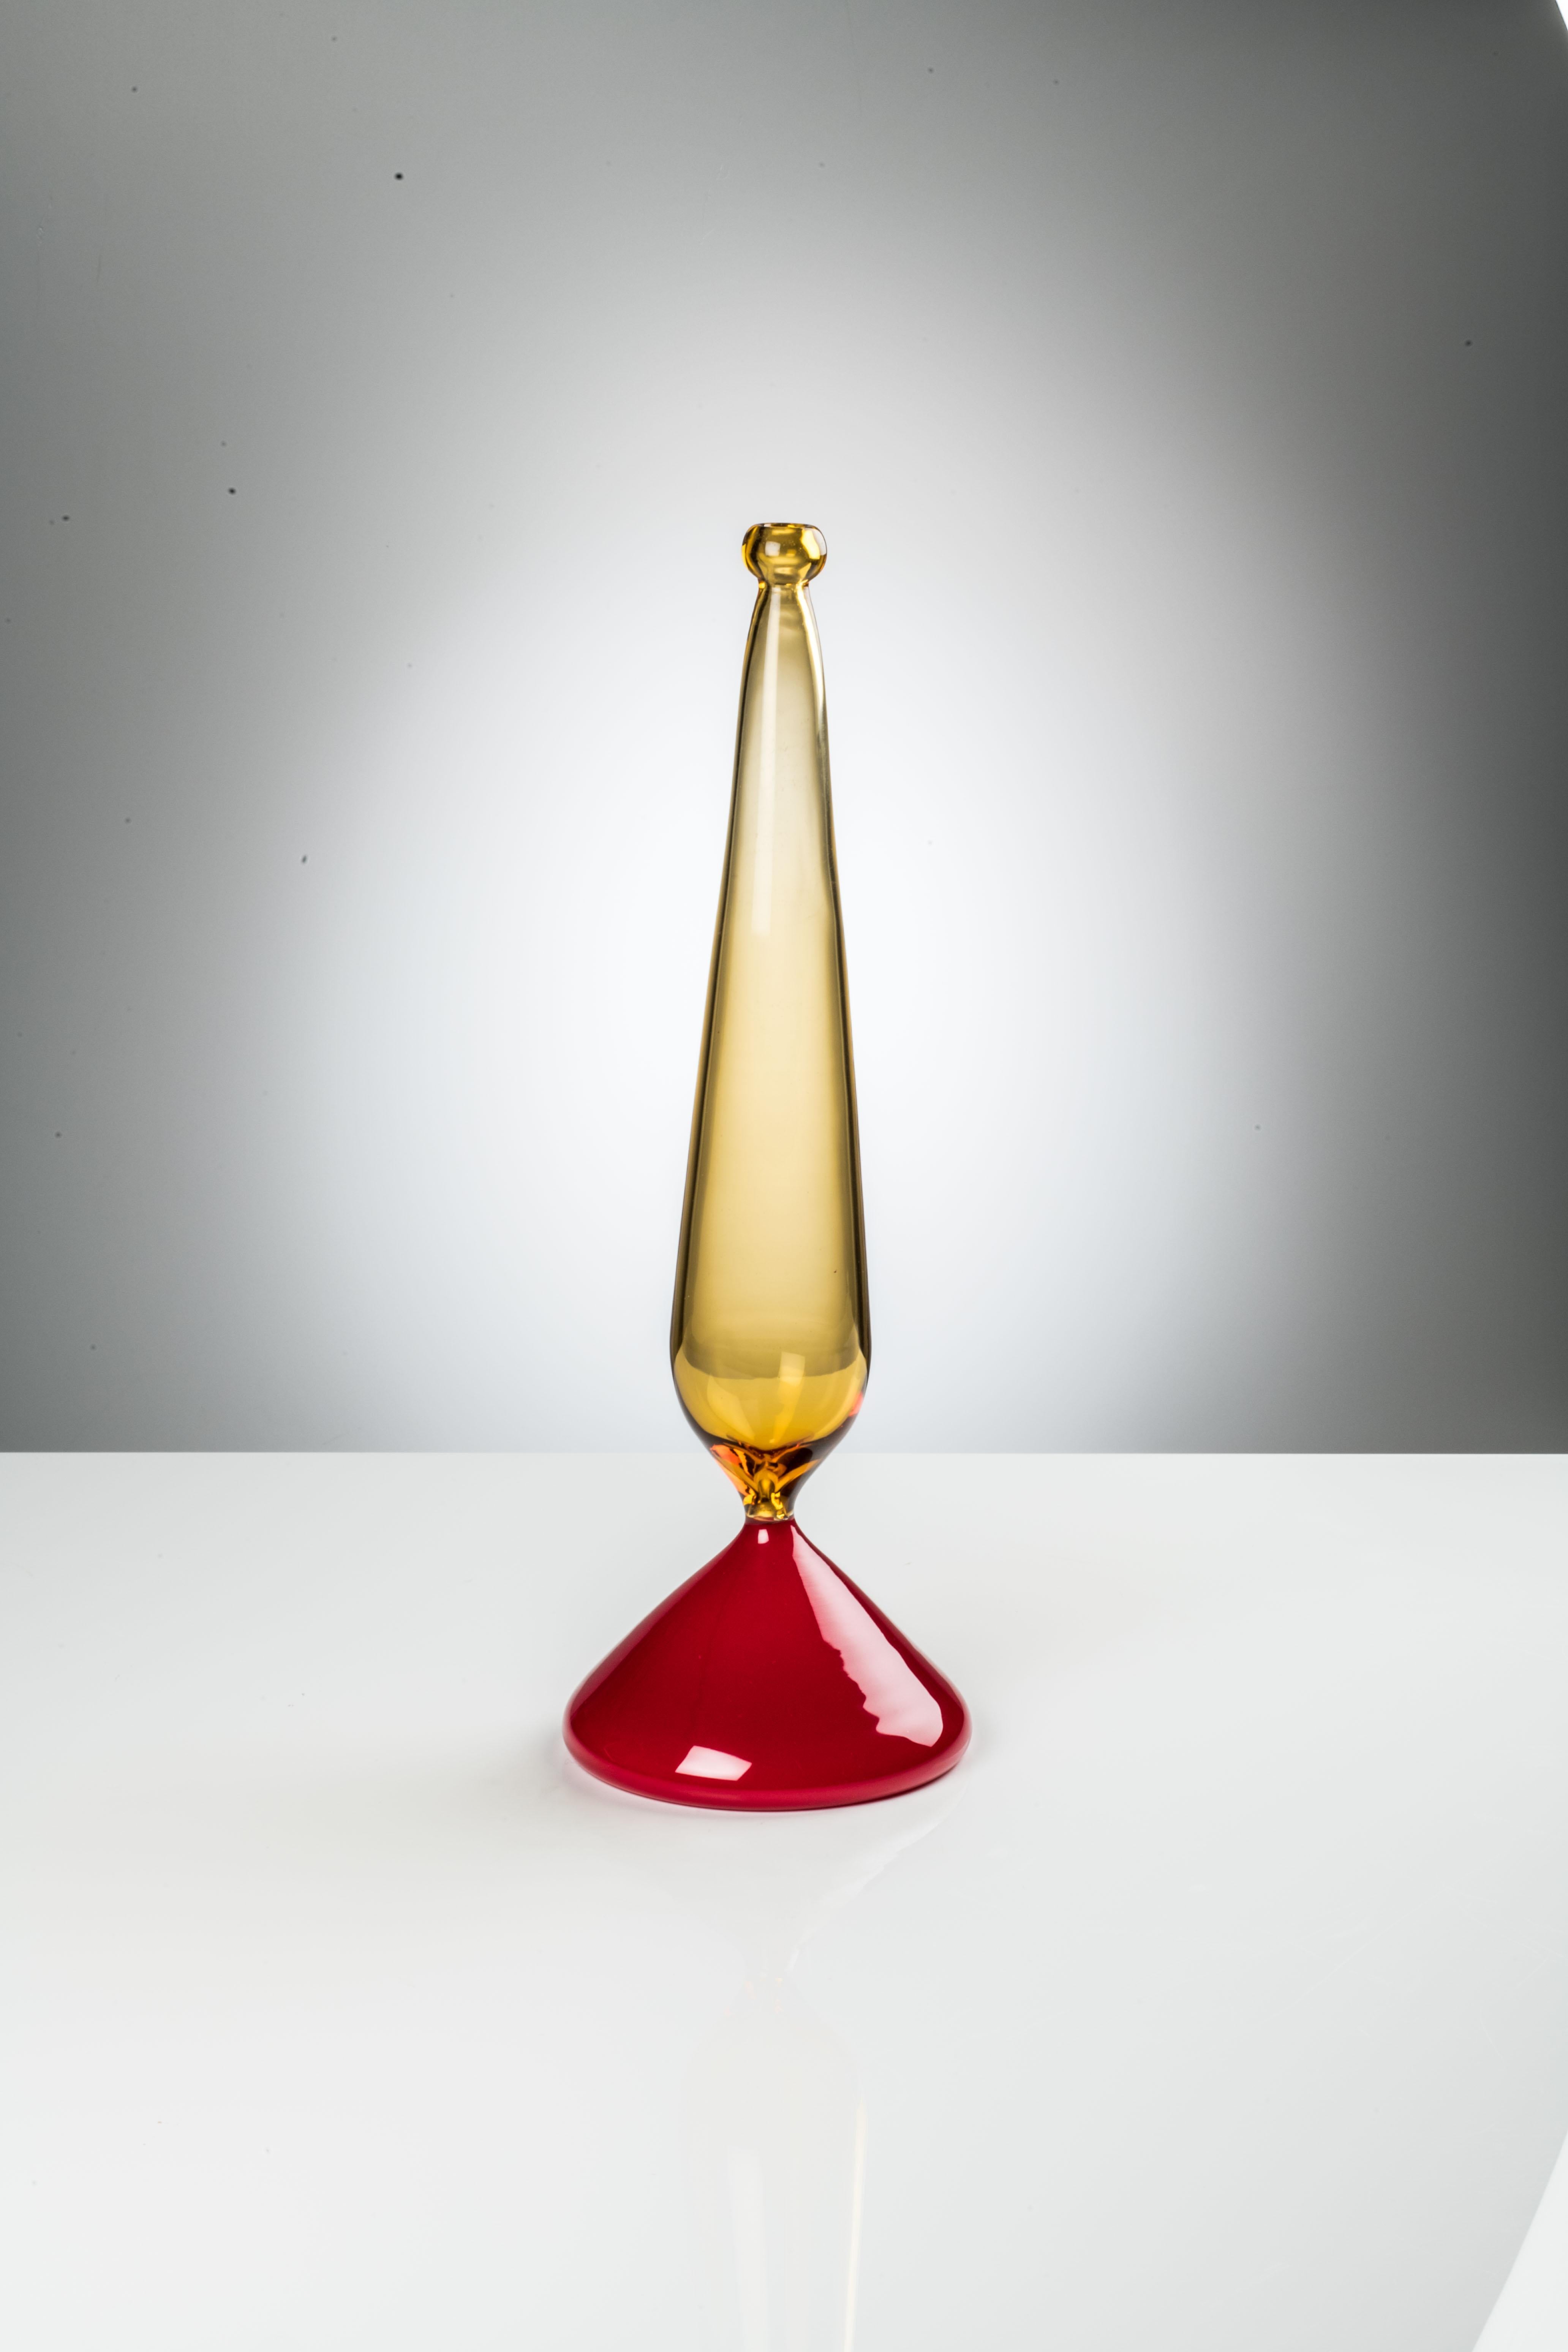 Rio glass sculptures, designed by Monica Giggisberg and Philip Baldwin and manufactured by Venini, are available in three different versions: Baritono, Tenore and Soprano. Indoor use only.

Dimensions: Ø 19 cm, H 51 cm.
 